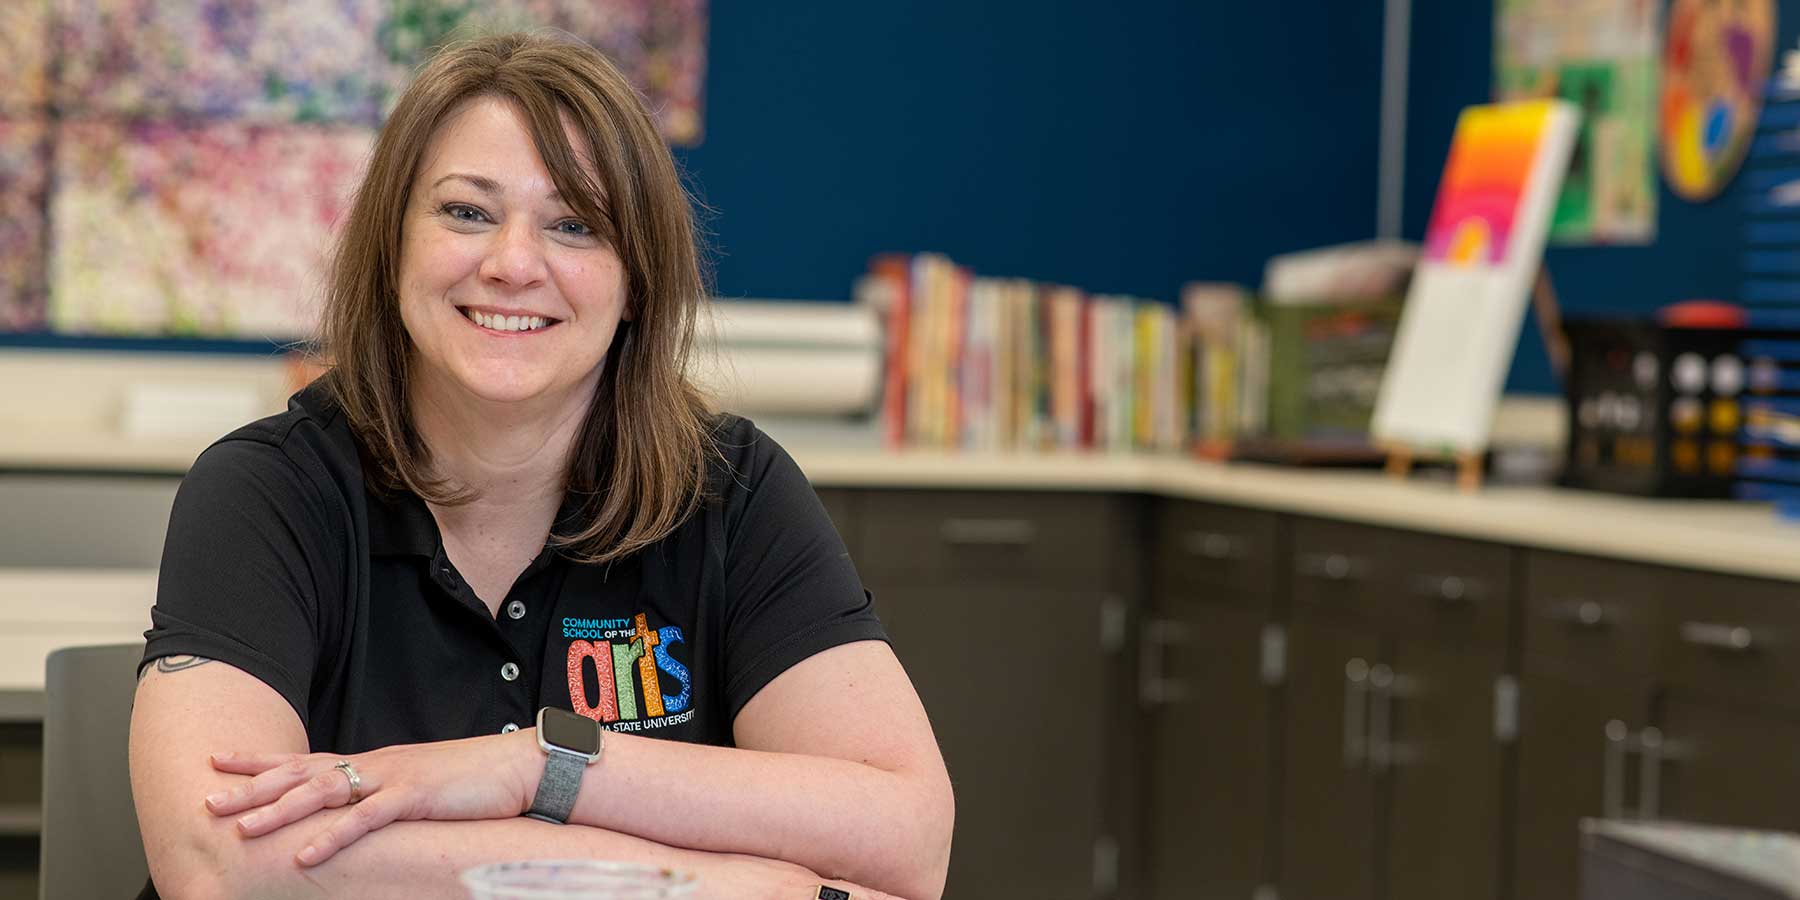 A white woman with shoulder-length brown hair sits, smiling at the camera. She wears a black T-shirt with a colorful patch reading Community School of the Arts, Indiana State University. Cabinets and counters are visible behind her with art supplies and art projects